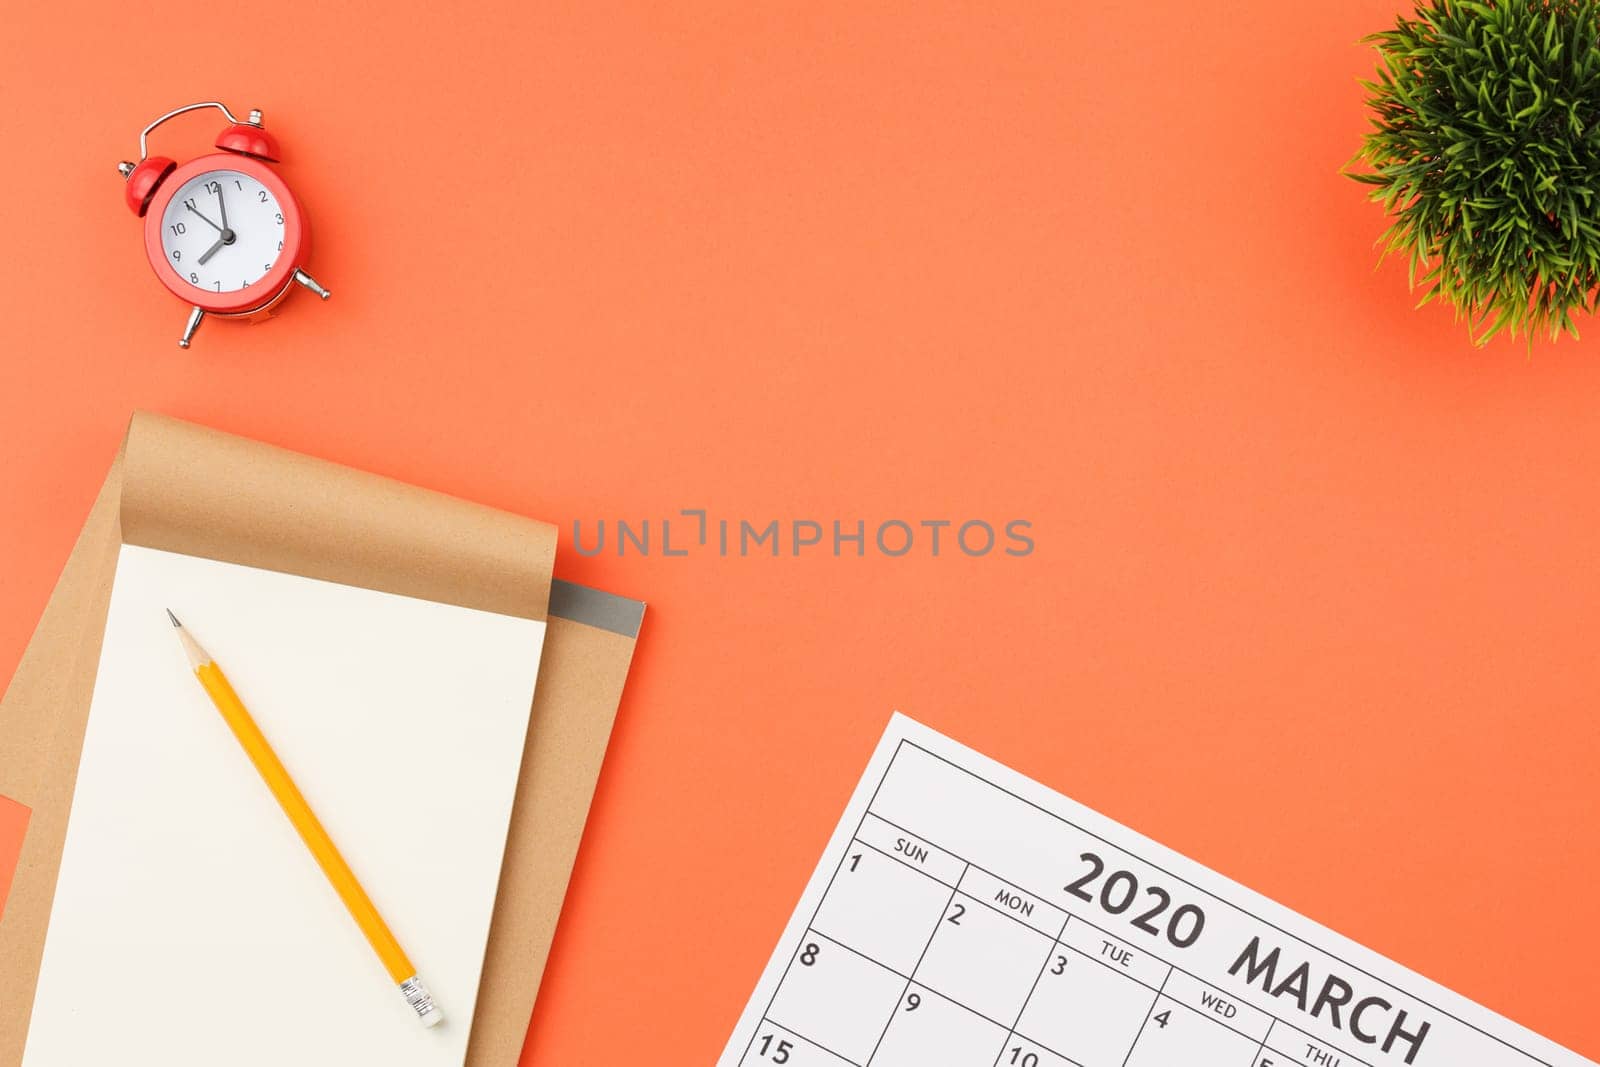 Craft notebook with white sheets, red alarm clock and pen, calendar sheet with dates and green leaves of a plant in a pot on an orange isolated background top view.